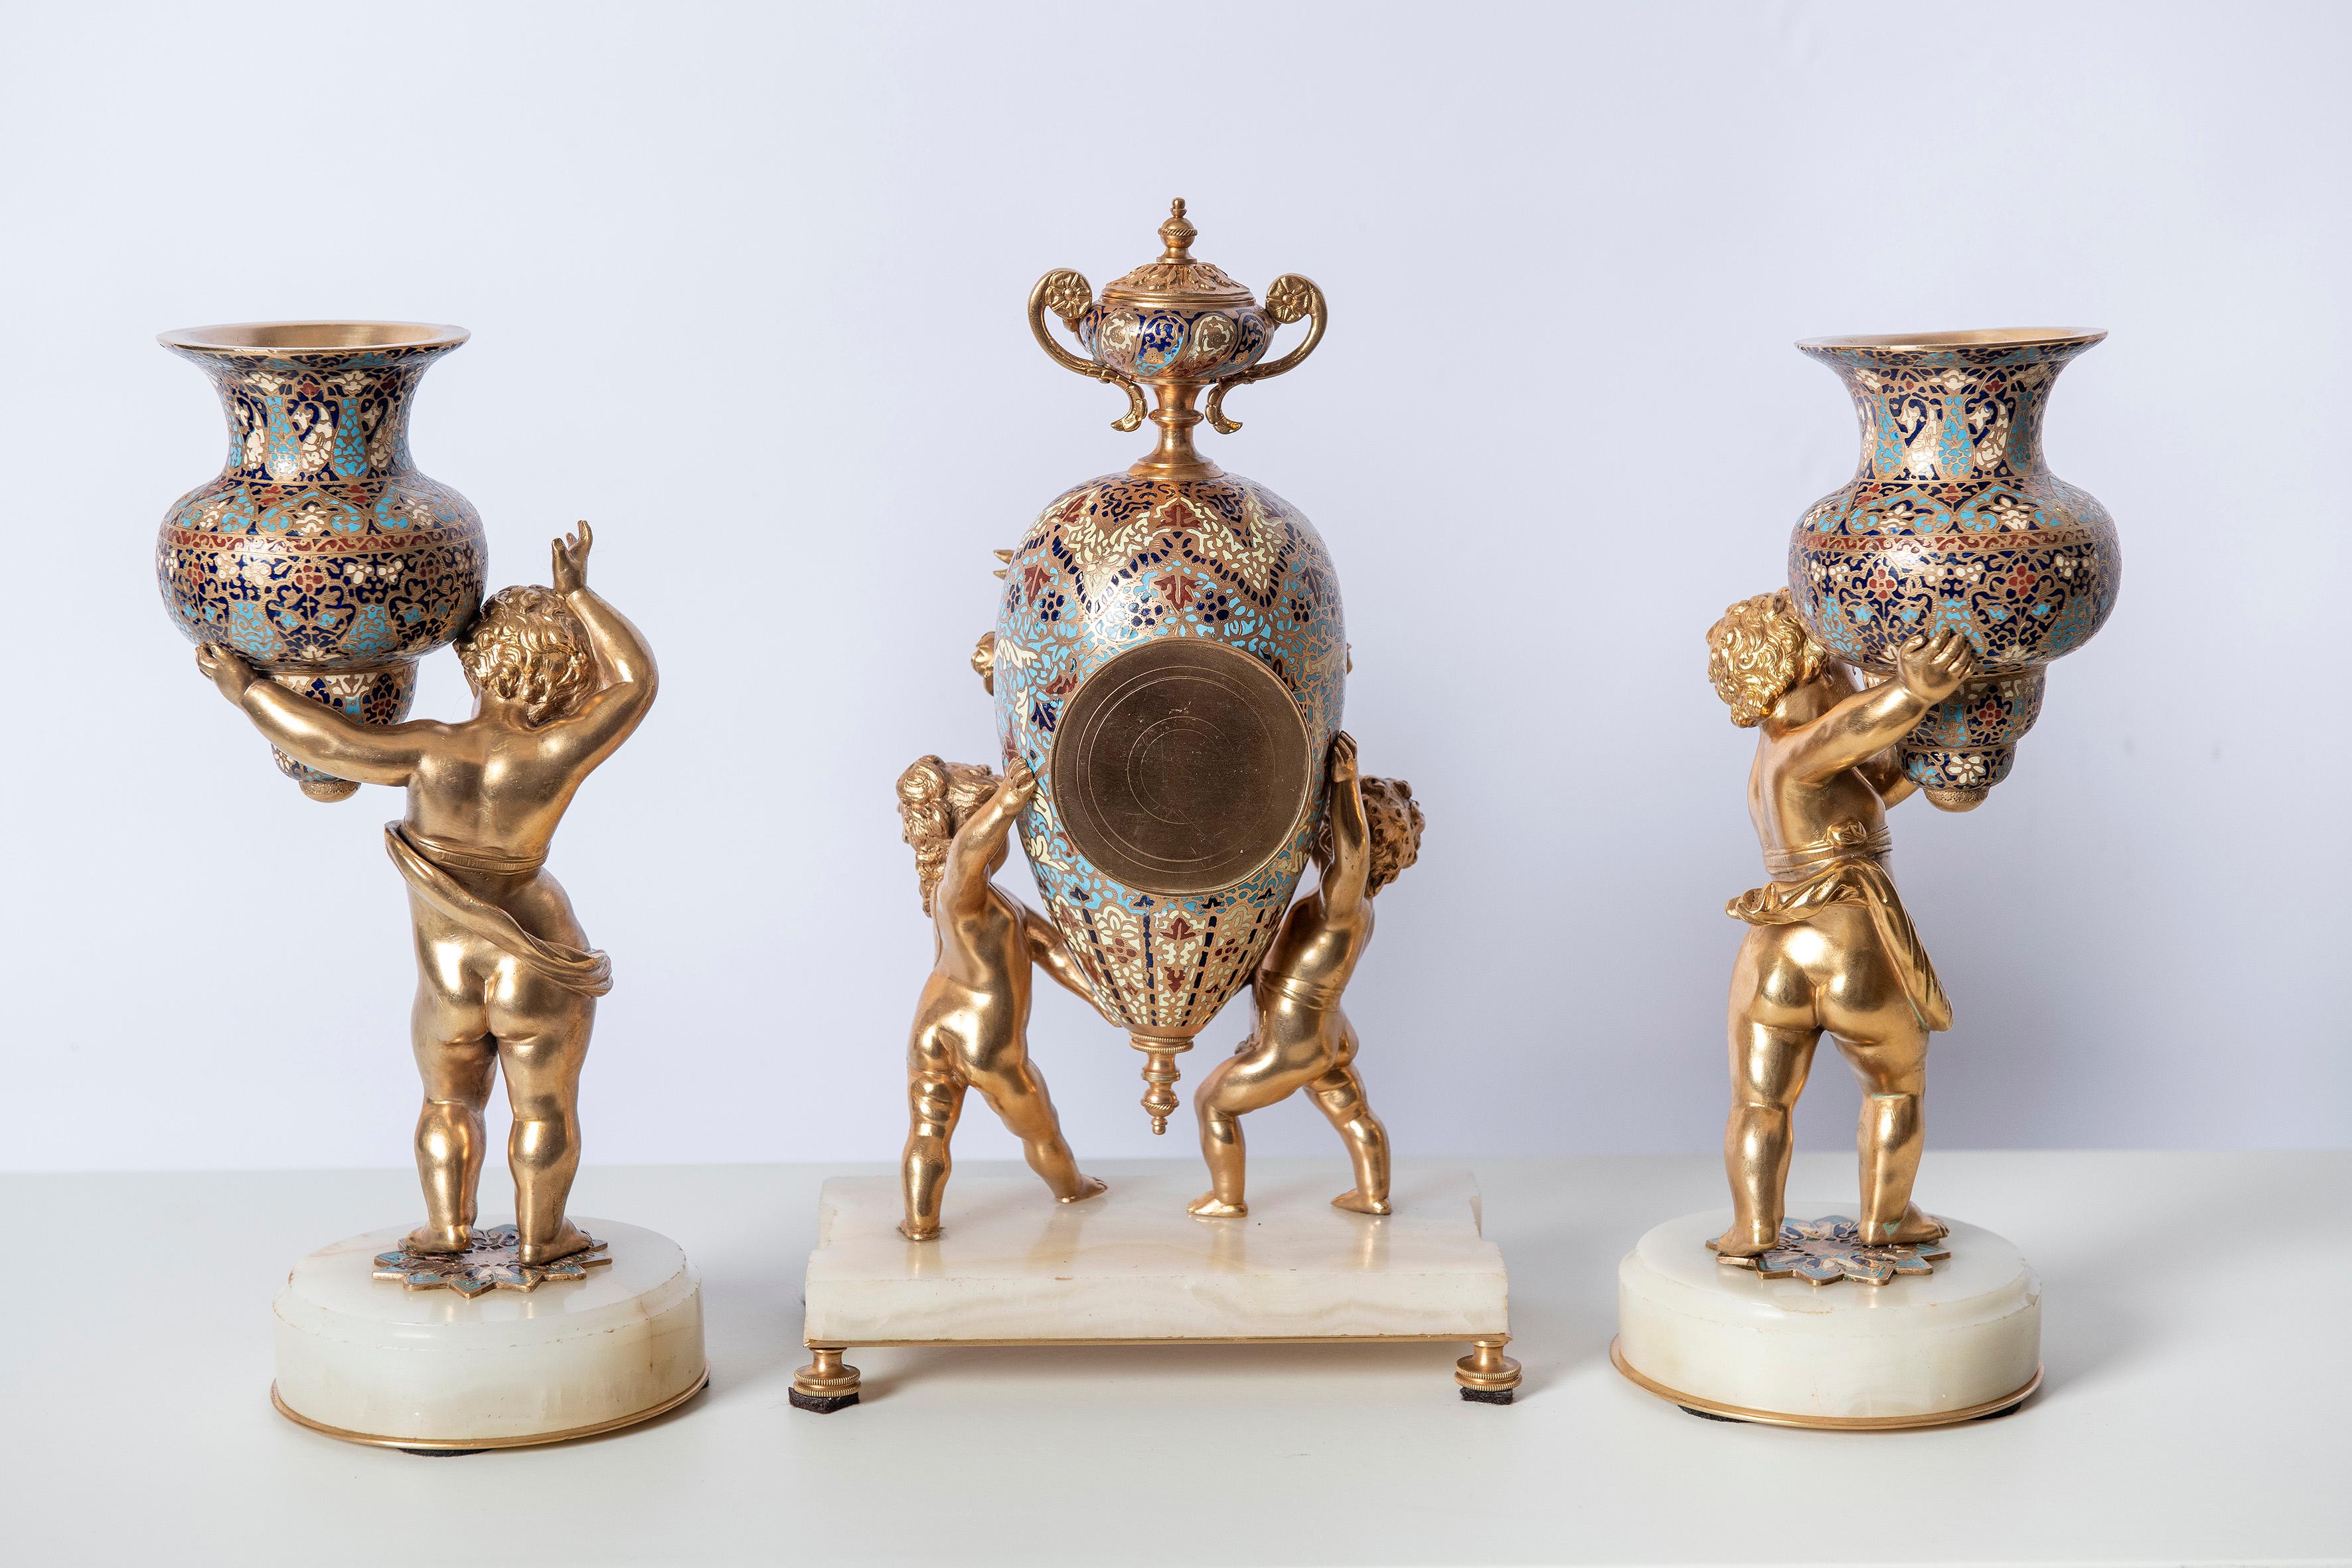 Gilt-bronze and cloisonné garniture with angels figures, France, 19th century.